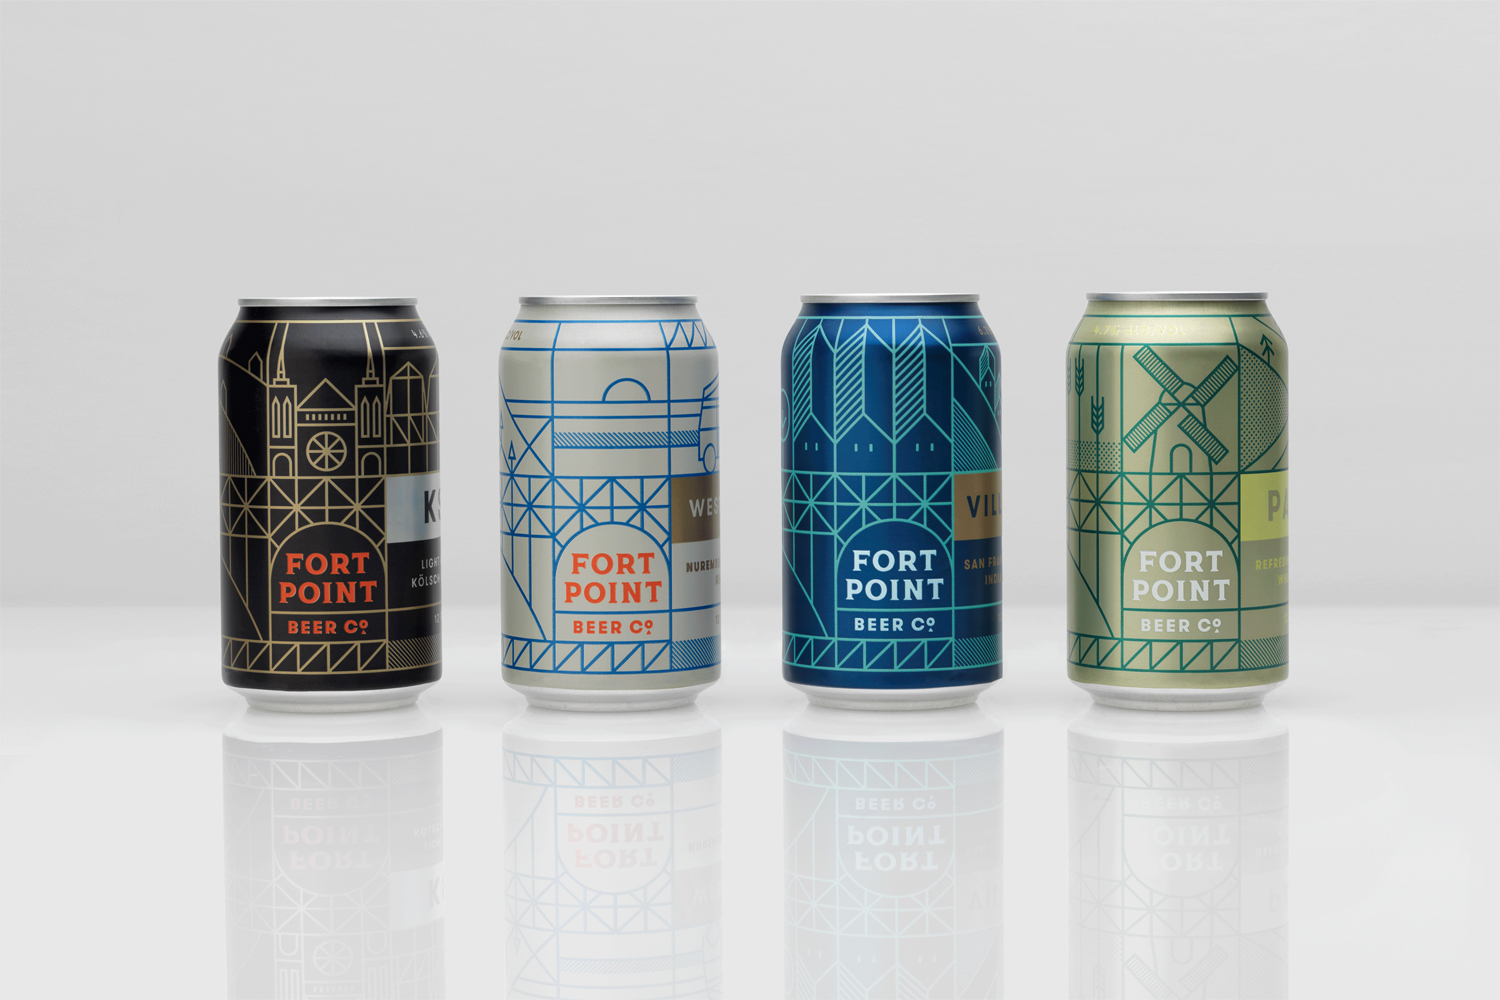 Craft Beer Branding & Packaging – Fort Point Beer Co. by Manual, United States